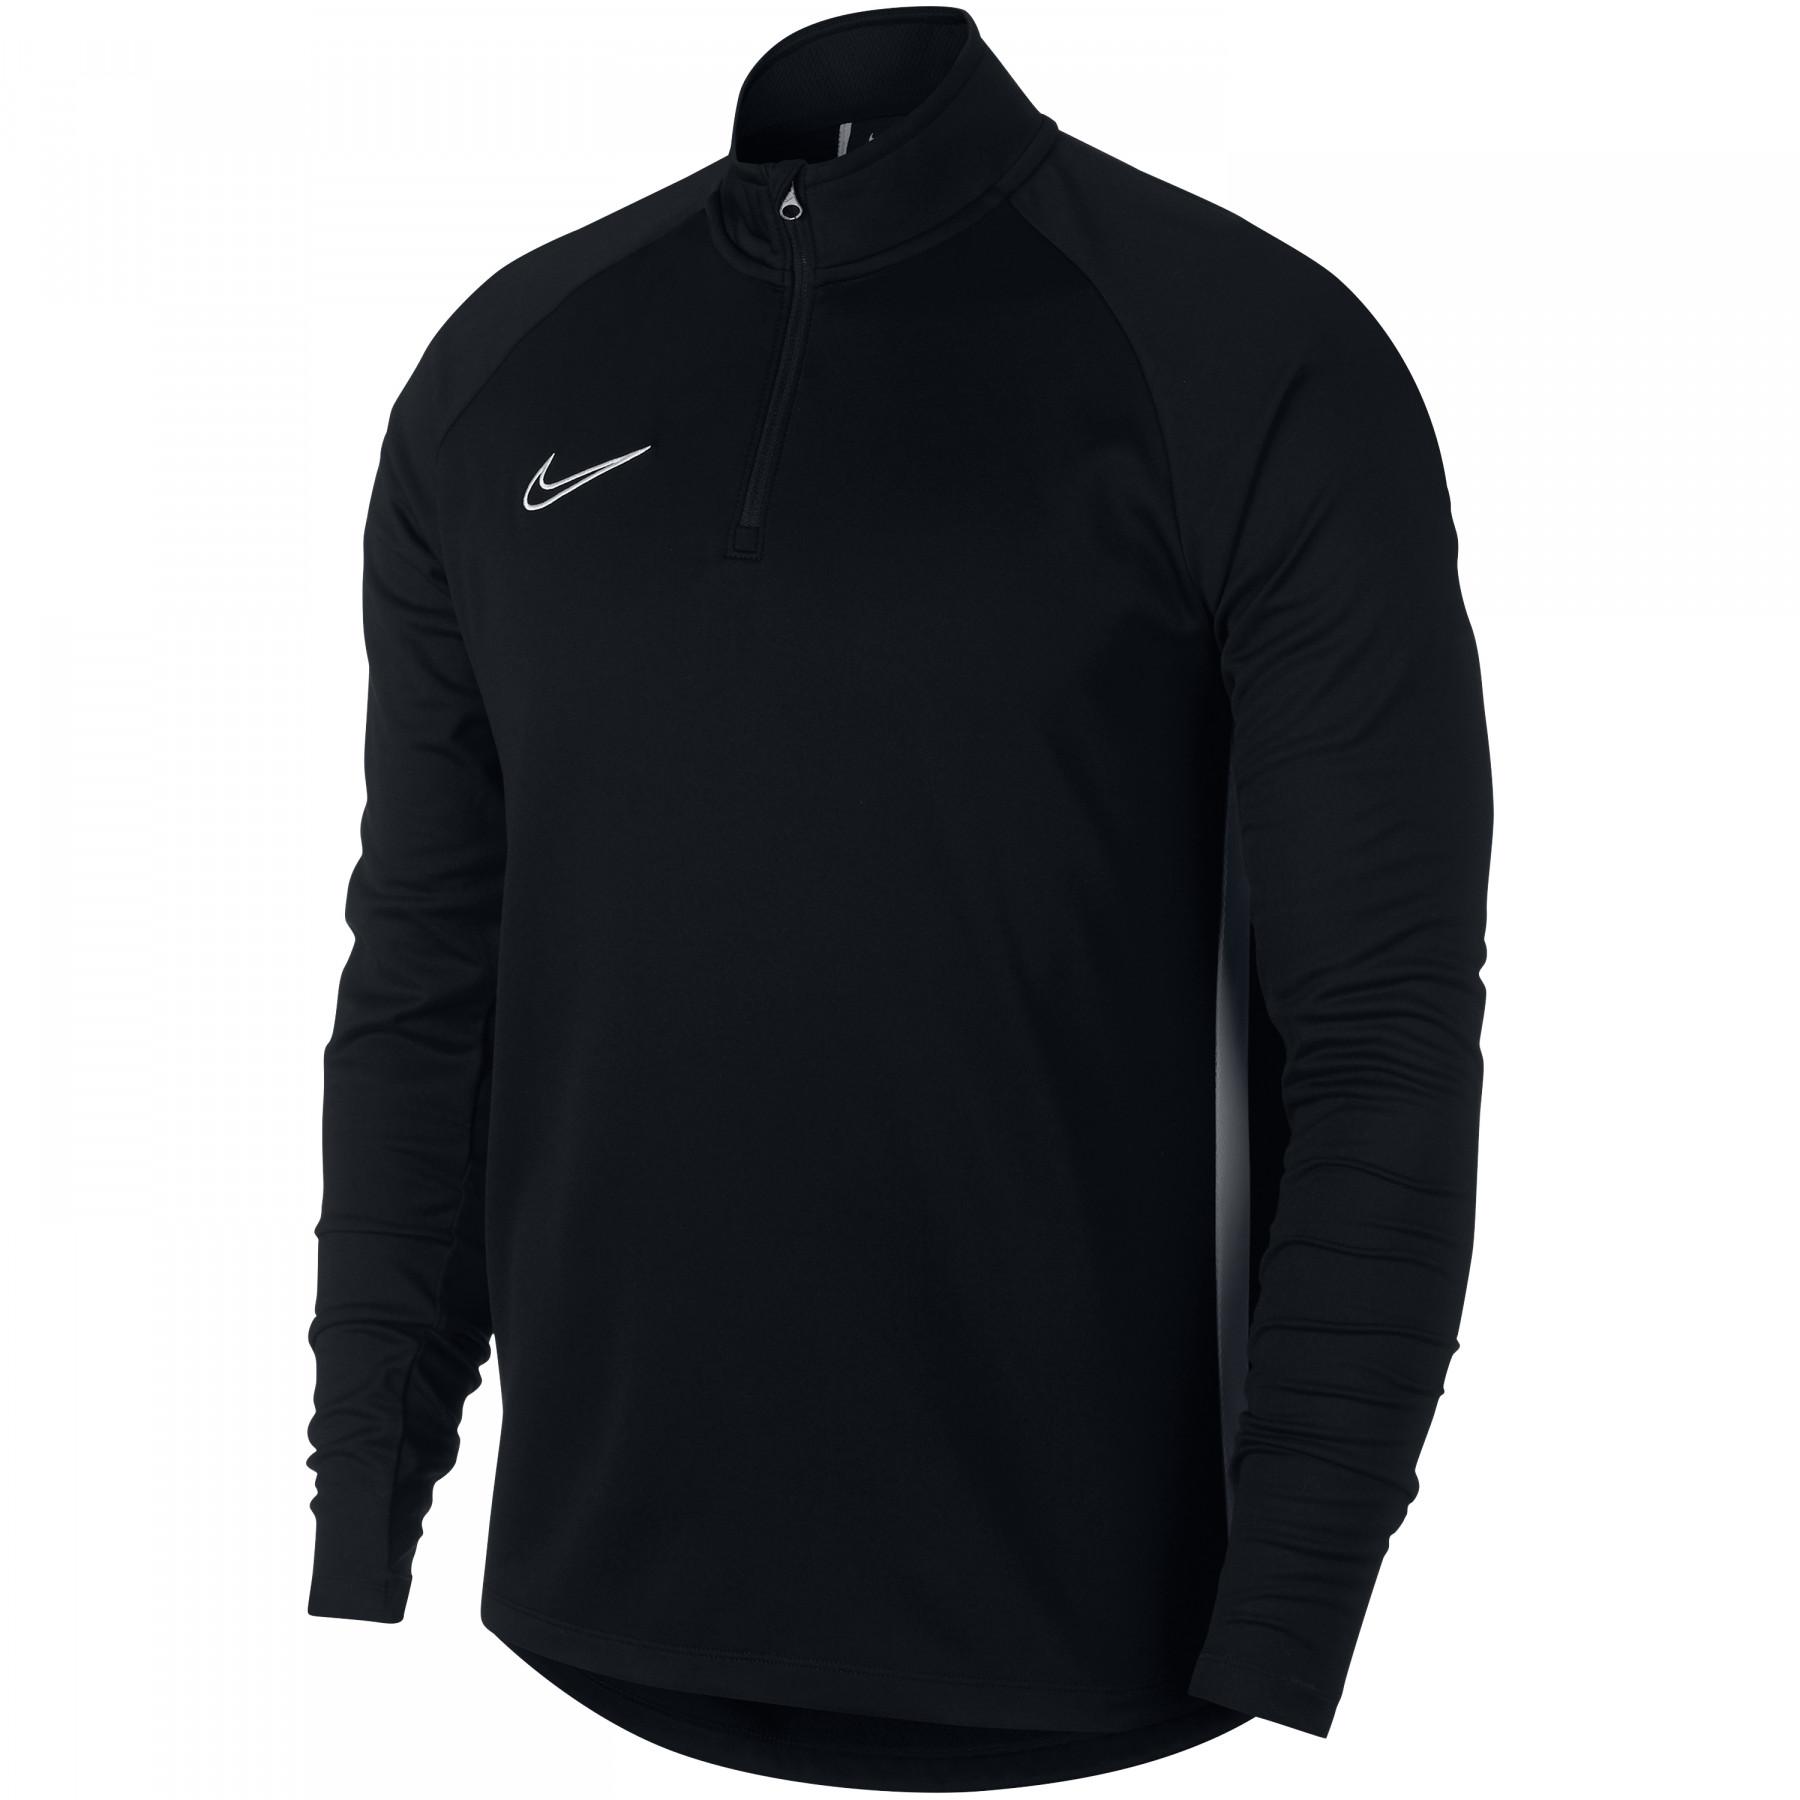 Maglia Nike dry Academy dril Top